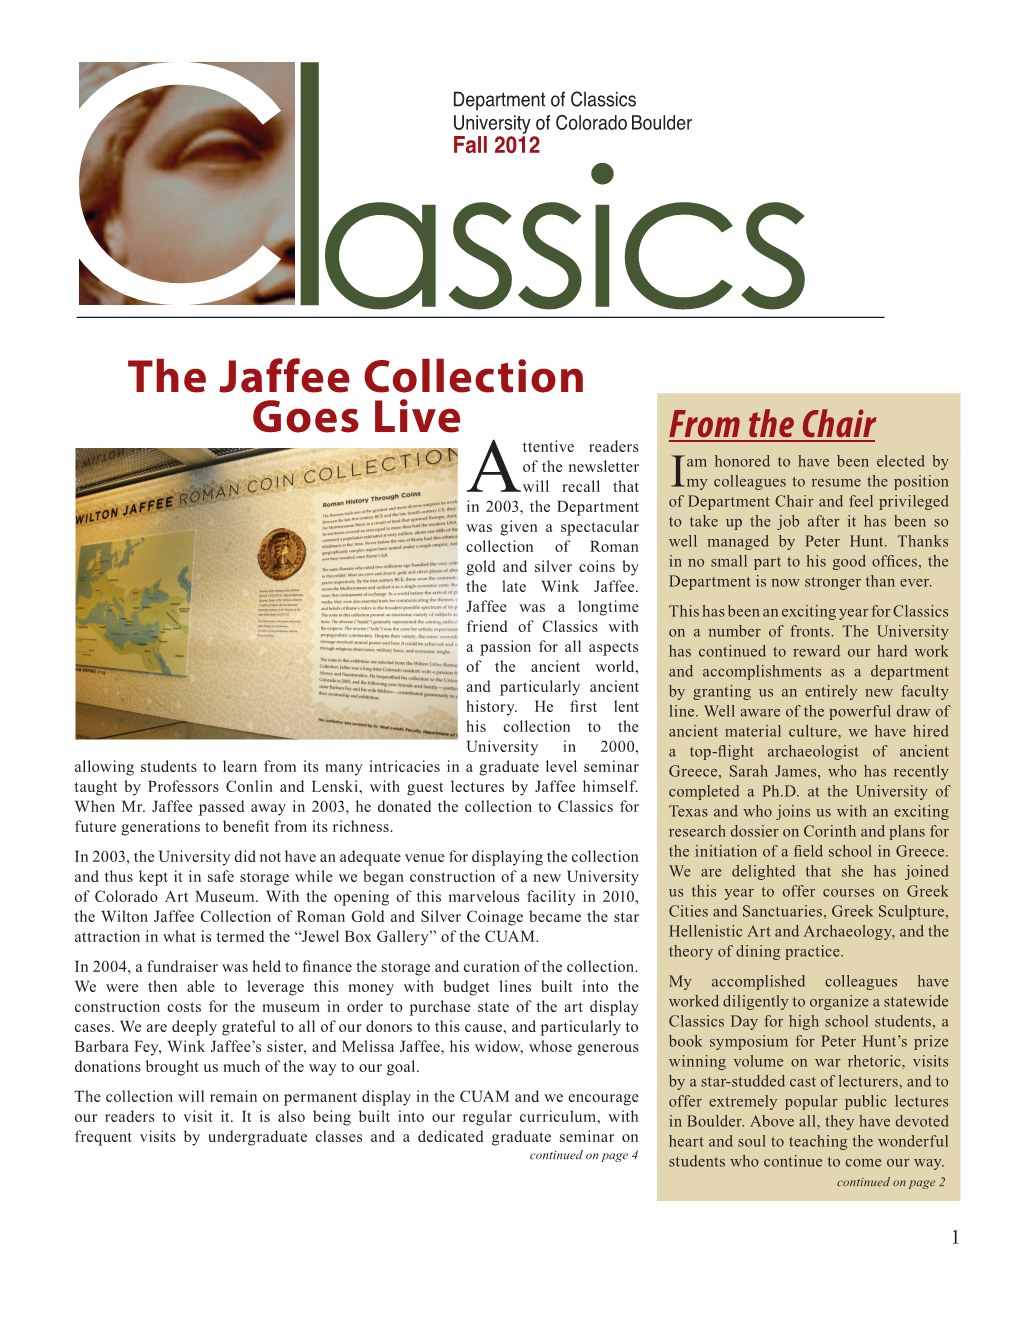 The Jaffee Collection Goes Live